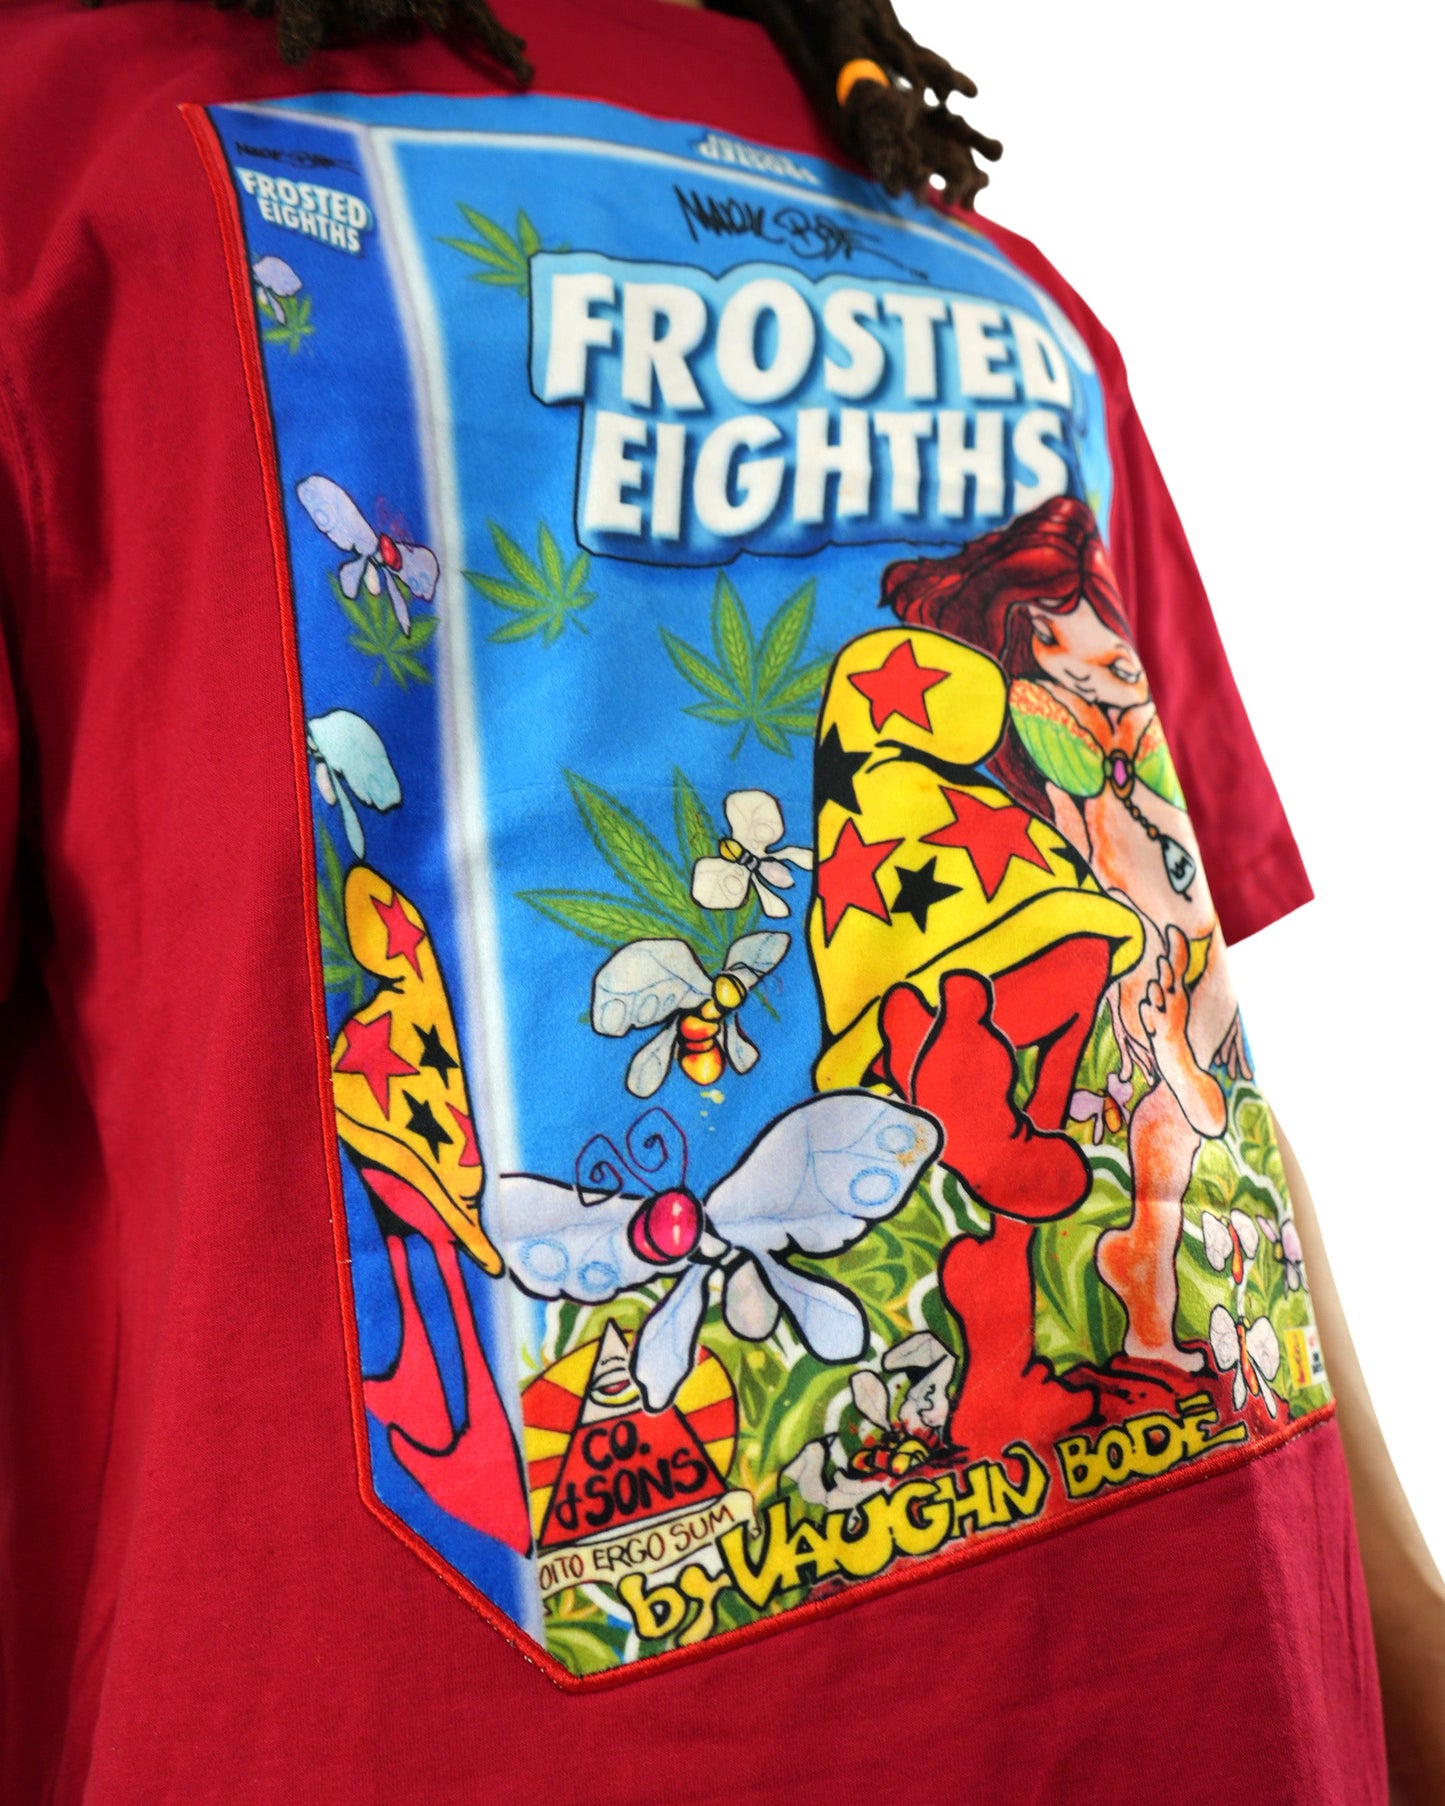 Mark Bodē Frosted Eighths Red T-Shirt